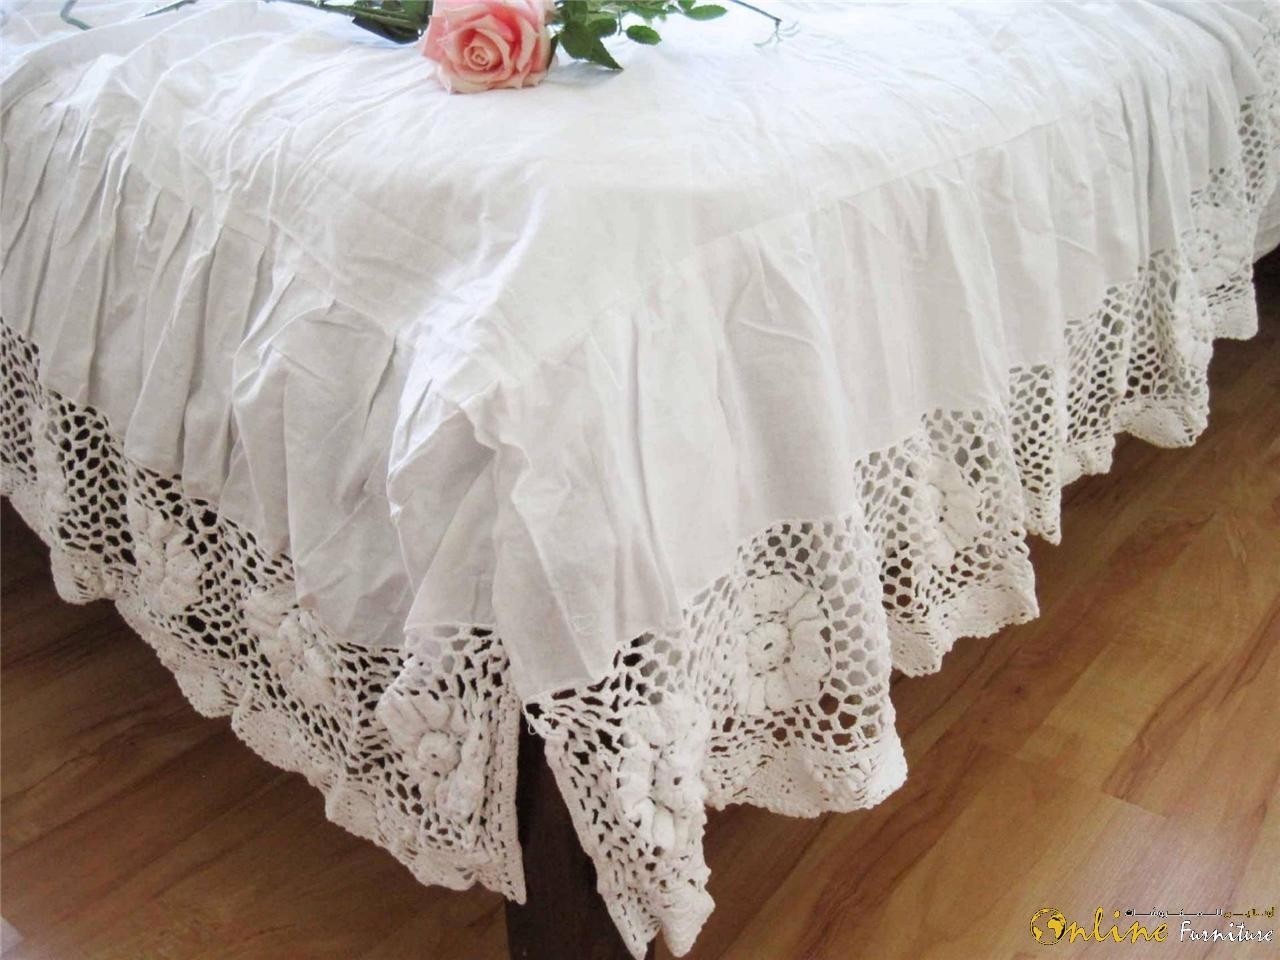 Wide floral hand crochet lace cotton bed sheet skirt valance